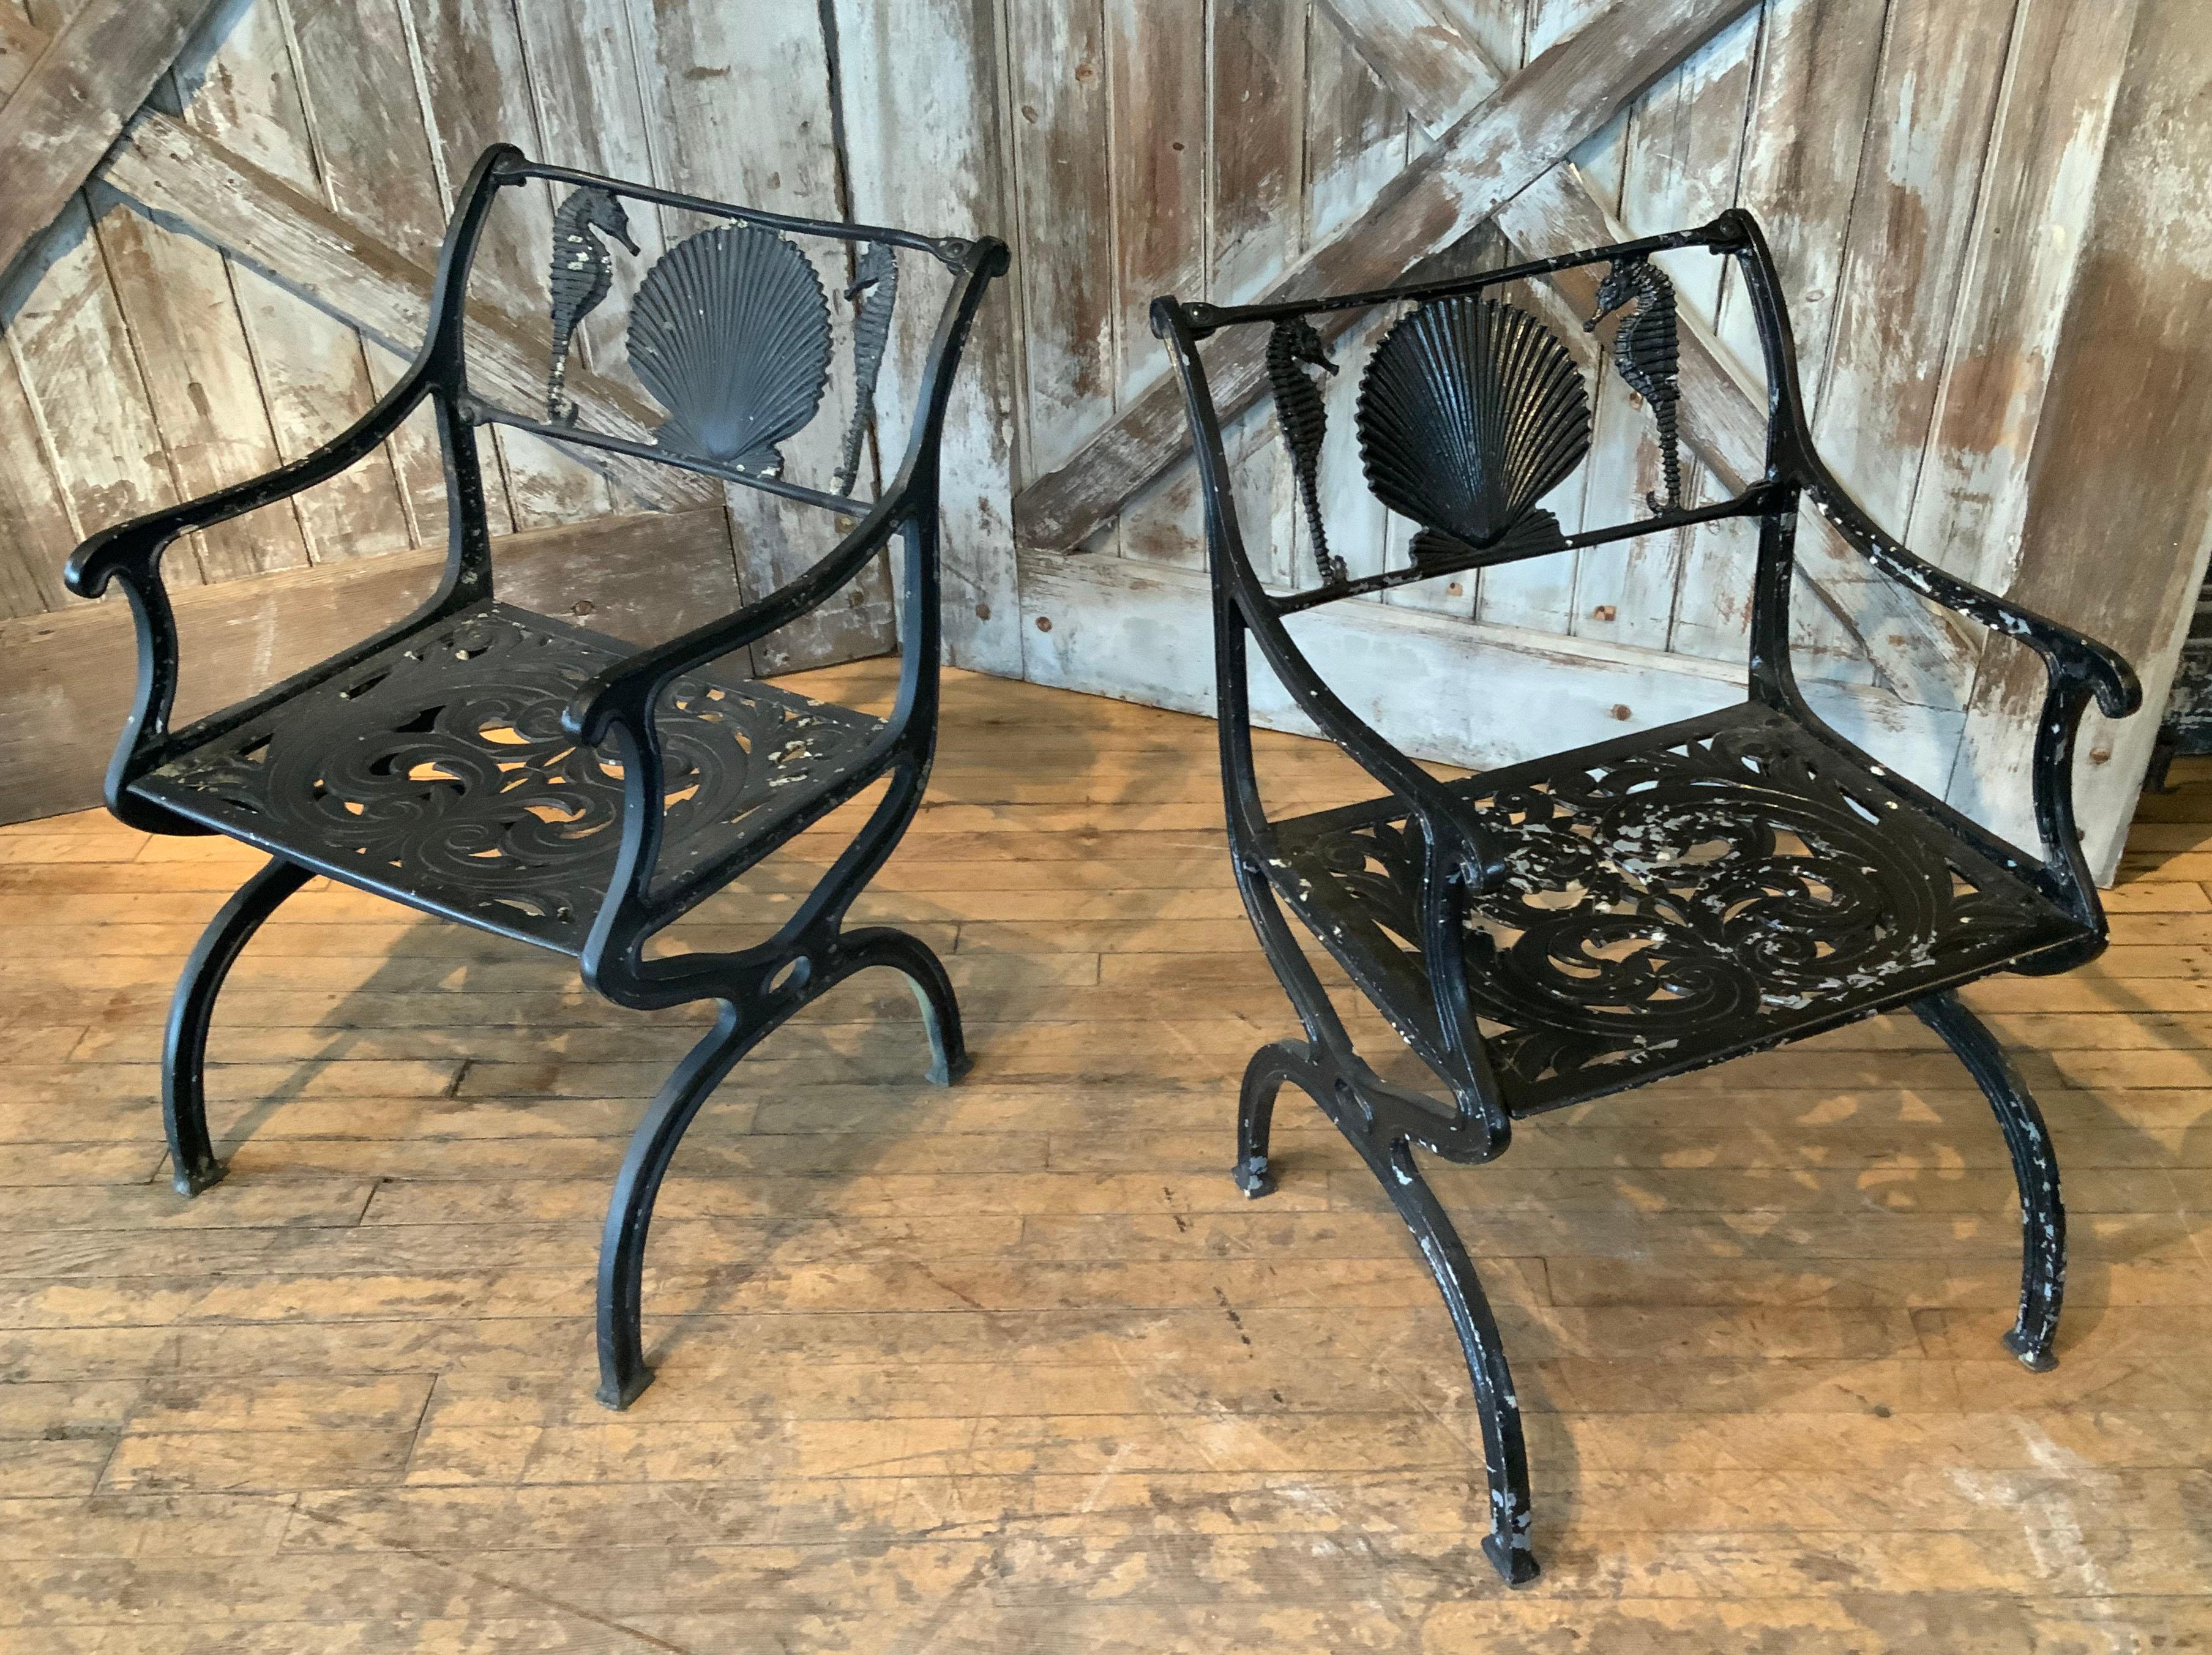 a classic pair of 1950's cast aluminum garden chairs with Seashell and seahorse motif in the seatback. beautiful scale and design. the orignla black finish is worn somewhat as pictured. made by Molla in the 1950's, a large group of these chairs were